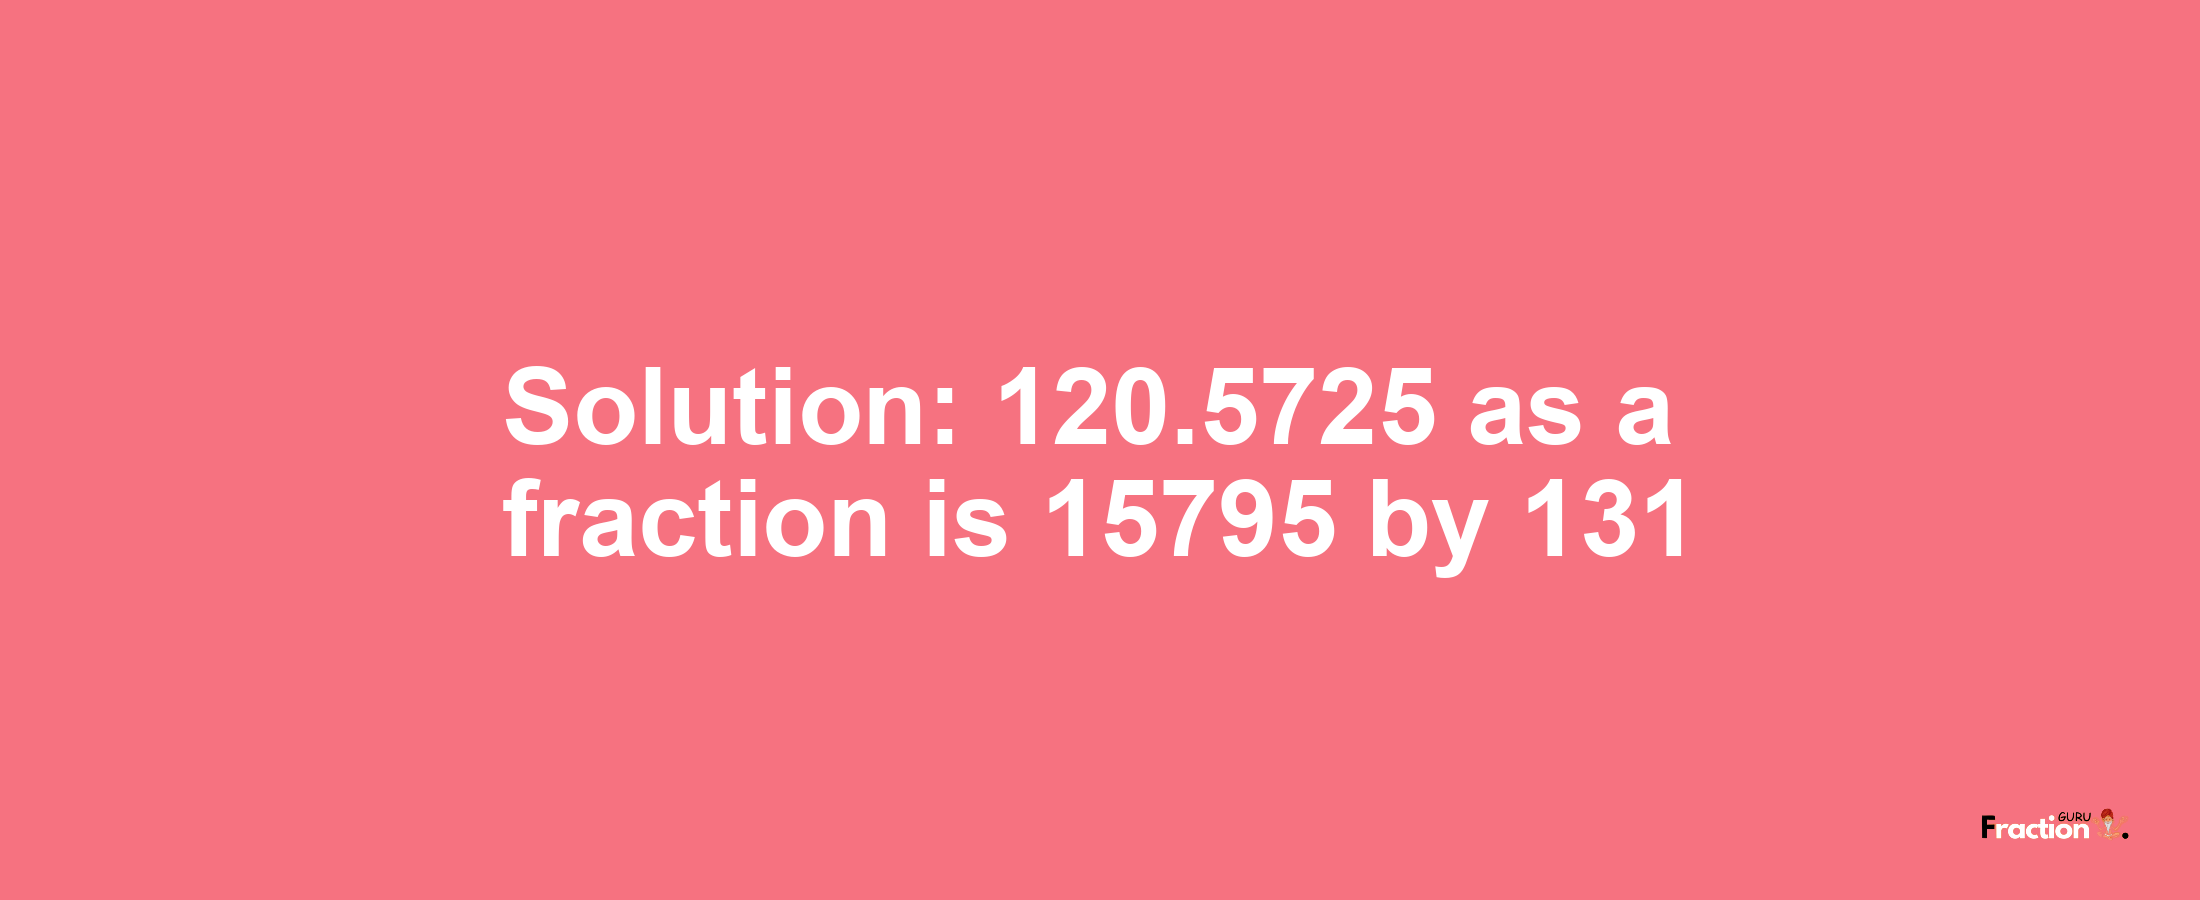 Solution:120.5725 as a fraction is 15795/131